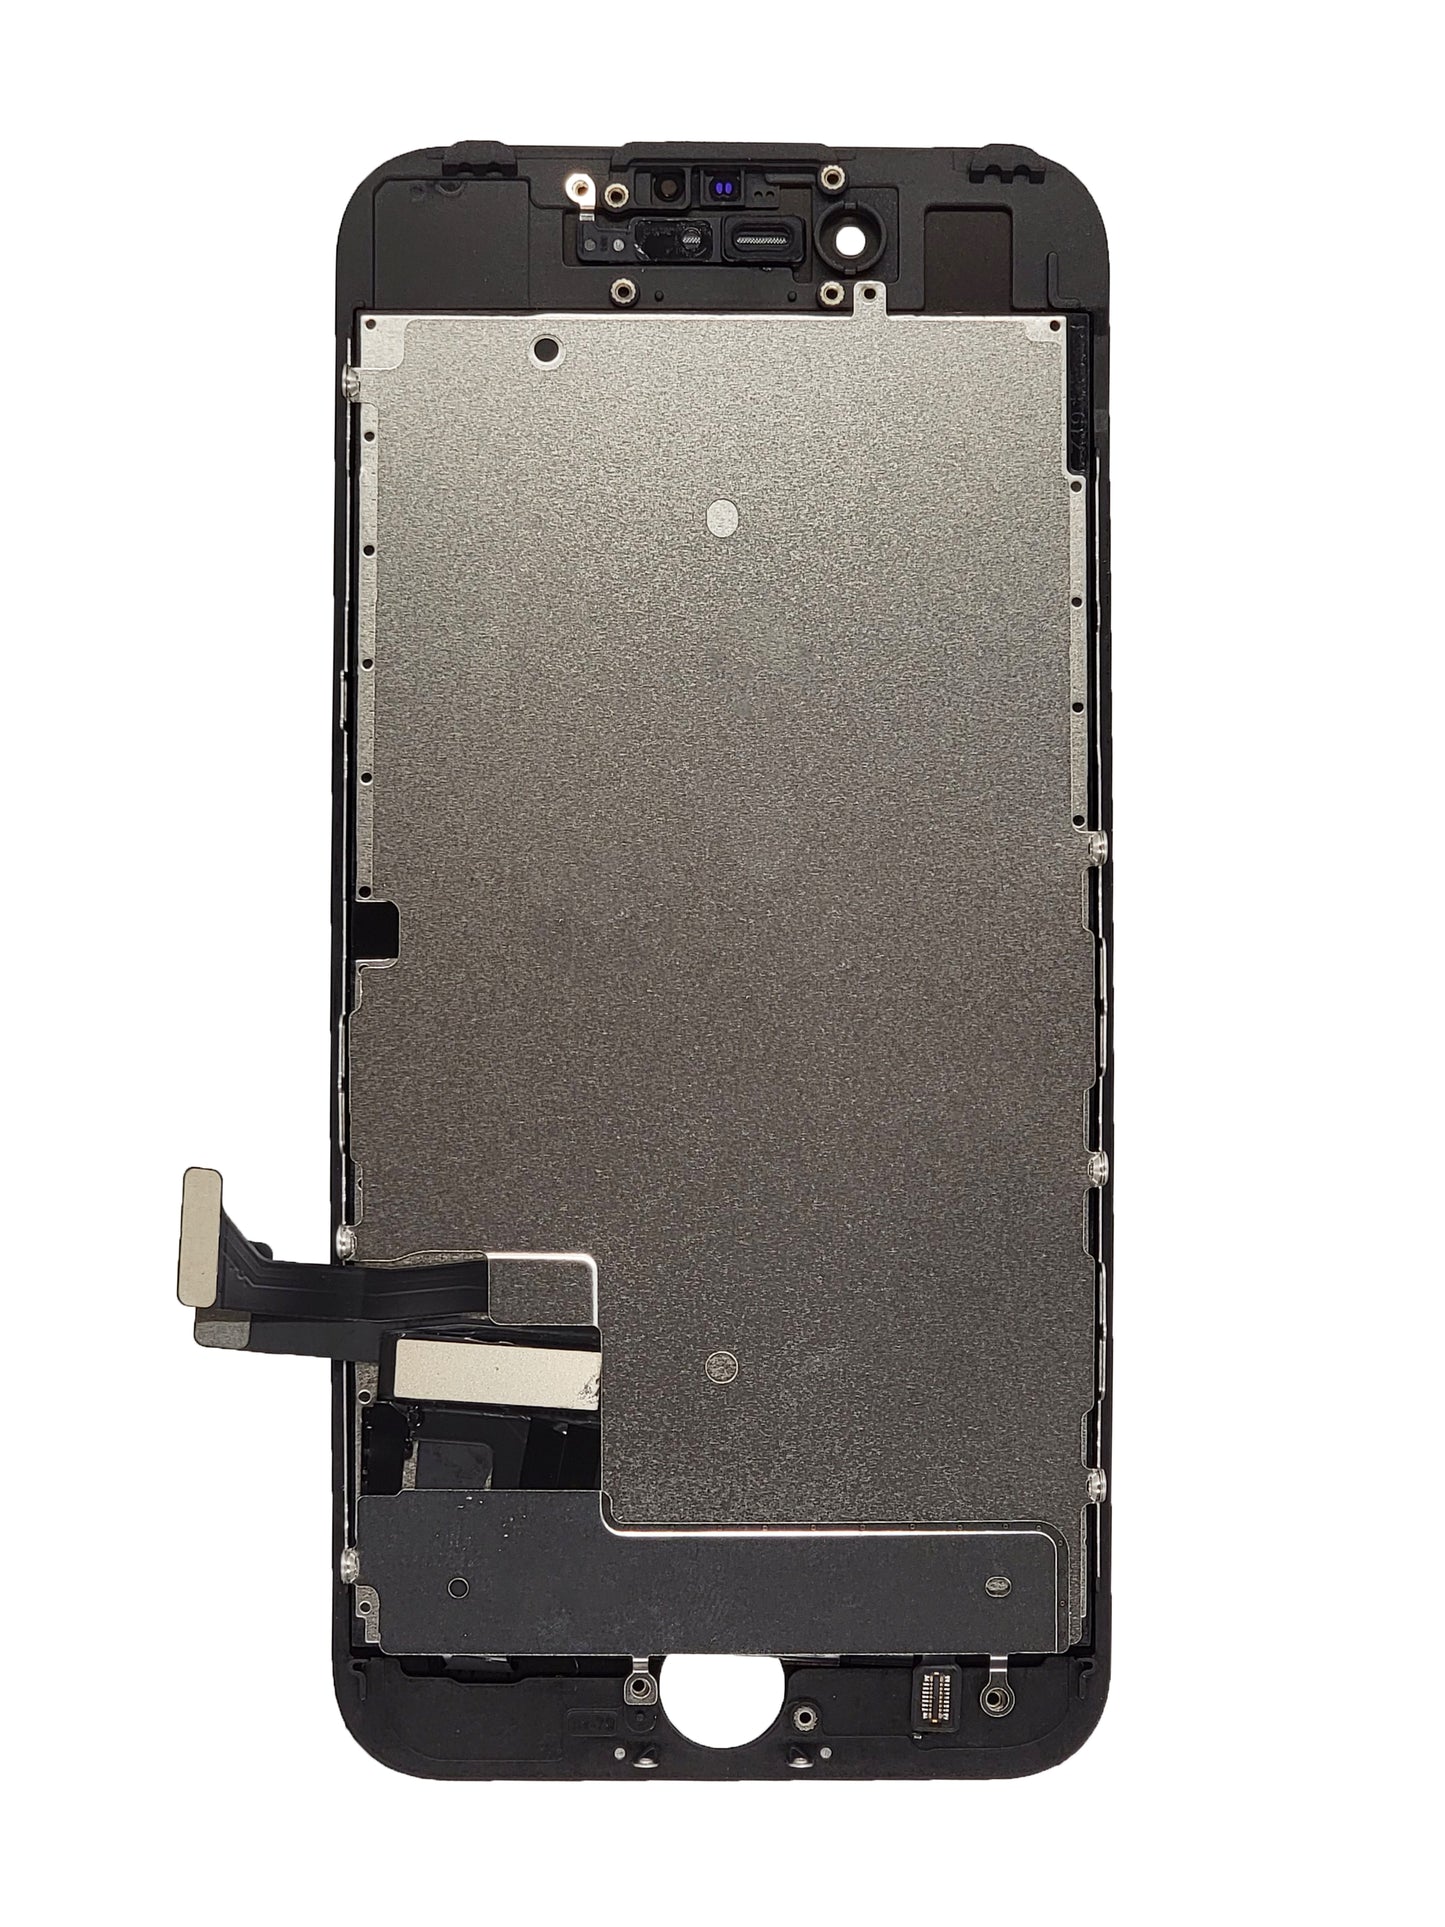 iPhone 7 LCD Assembly (Aftermarket) (Black)